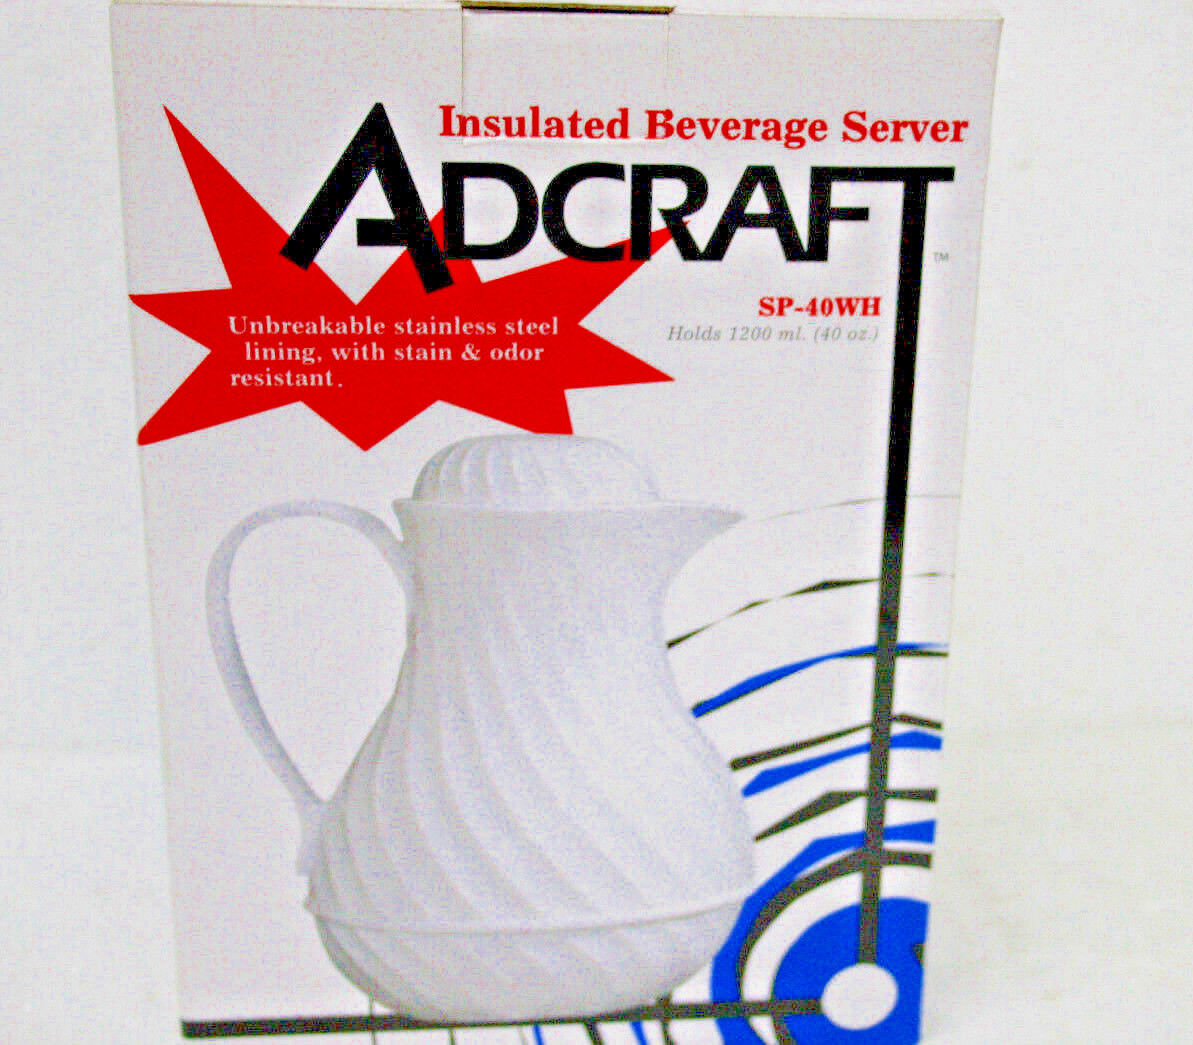 Adcraft Beverage Server  Insulated Stainless Steel Lining SP-40WH (White)